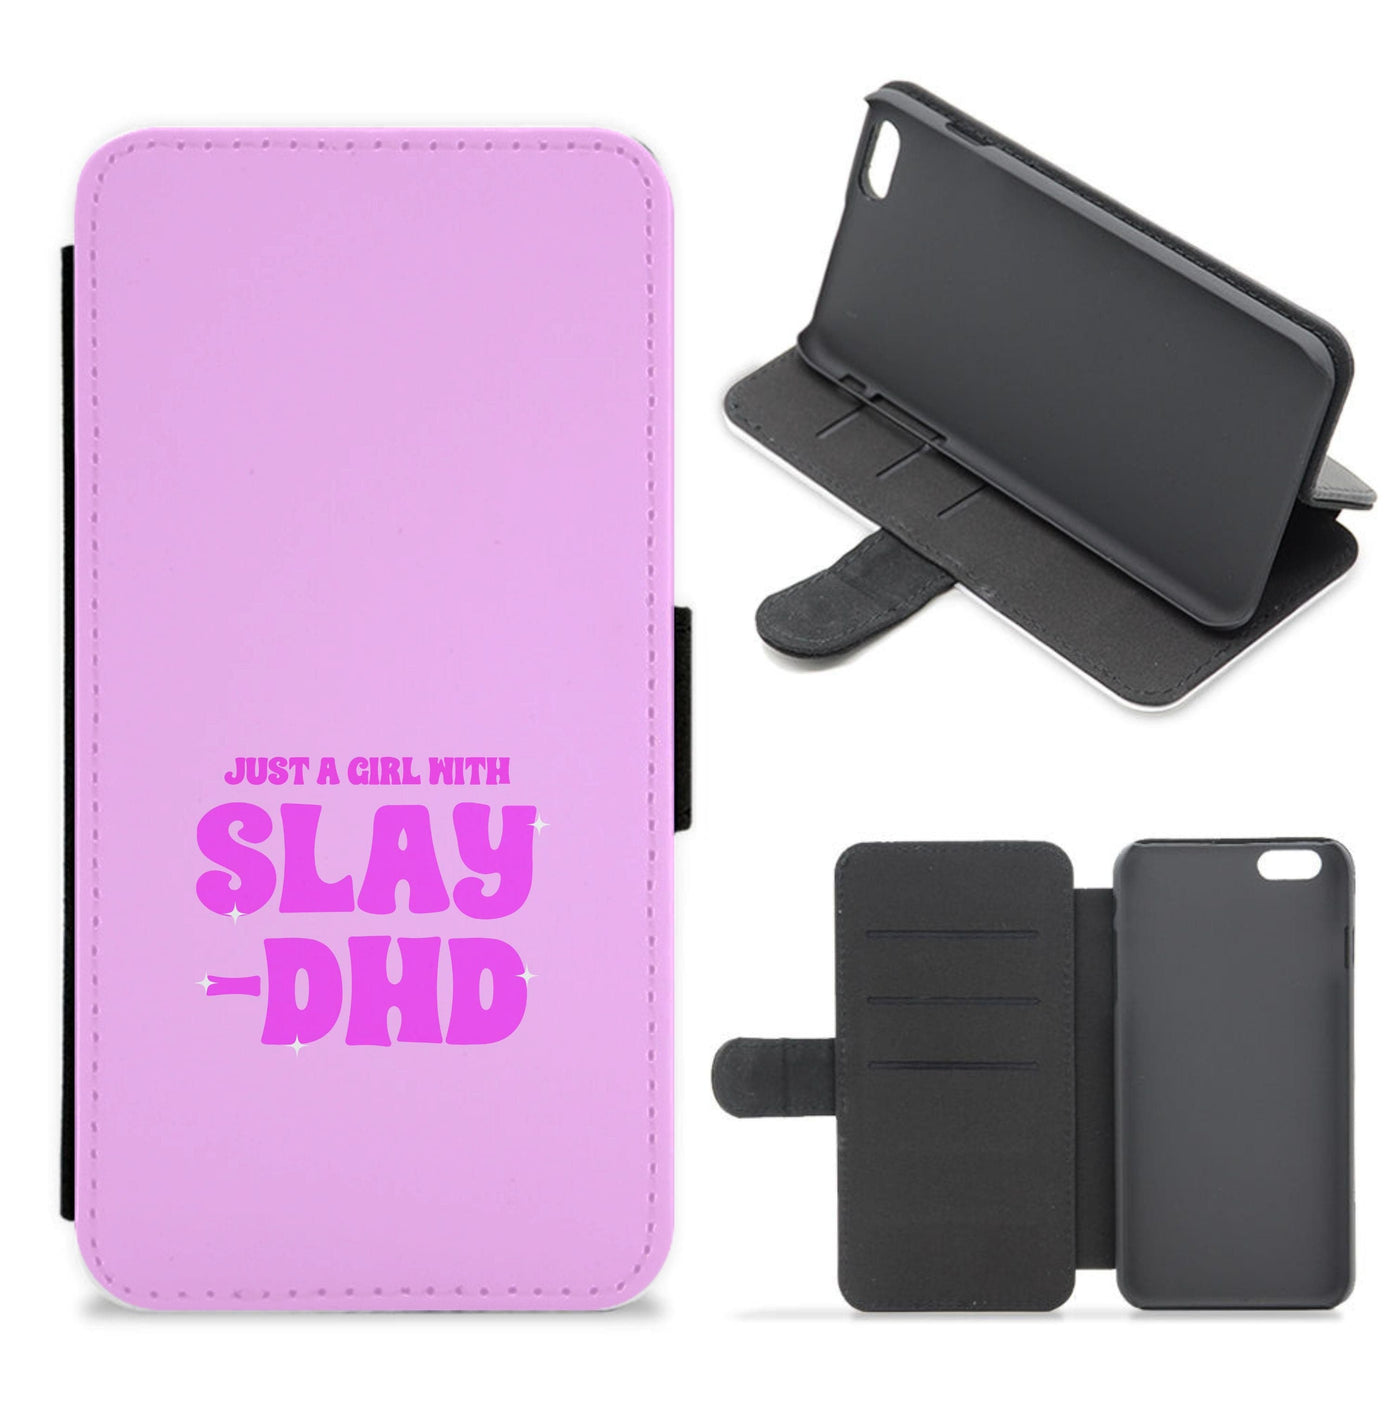 Just A Girl With Slay-DHD - TikTok Trends Flip / Wallet Phone Case